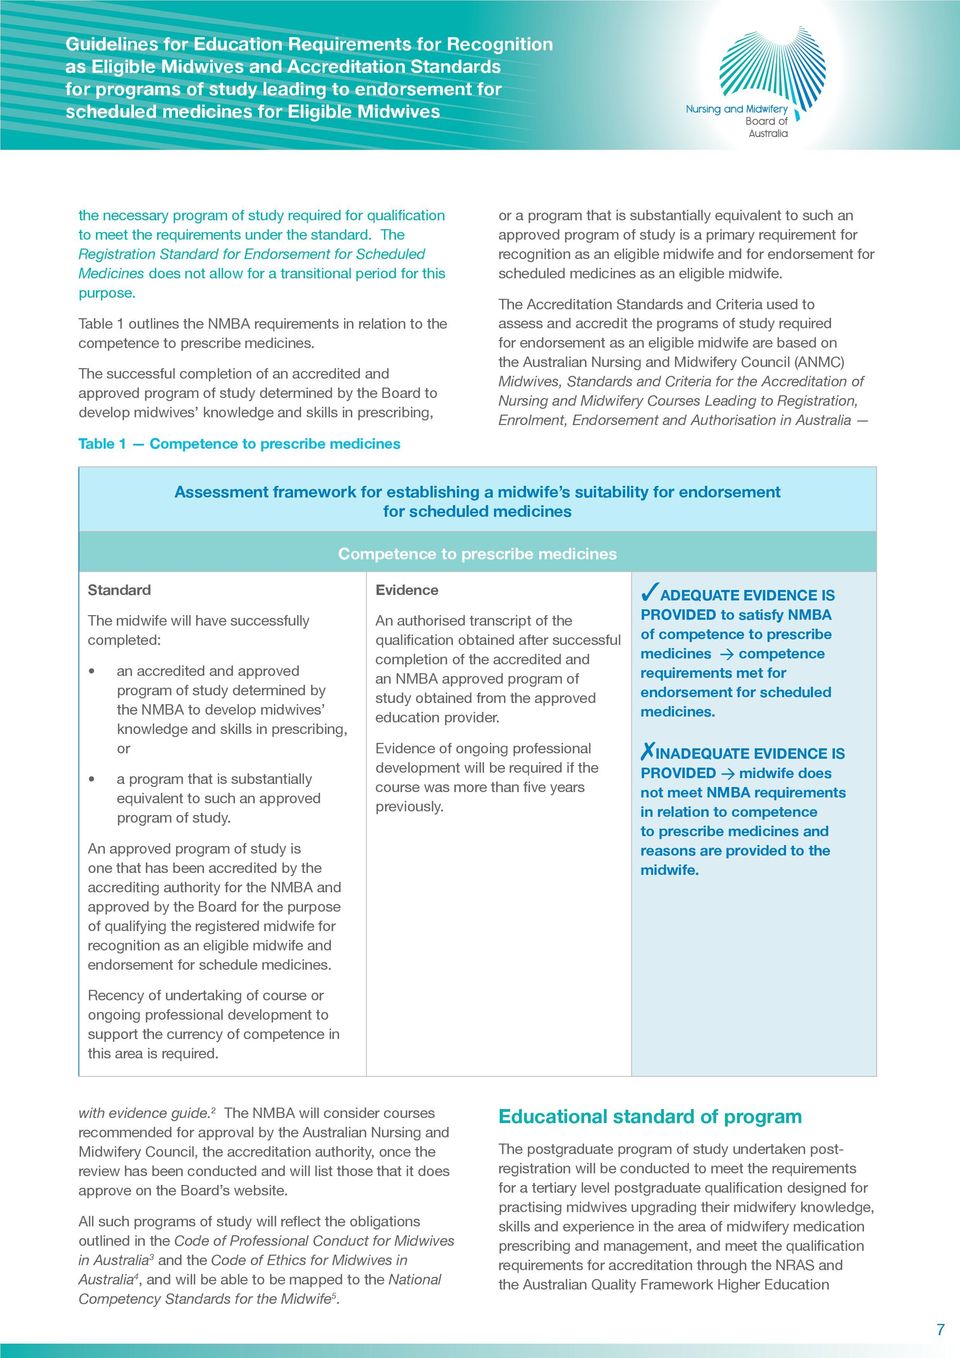 Table 1 outlines the NMBA requirements in relation to the competence to prescribe medicines.